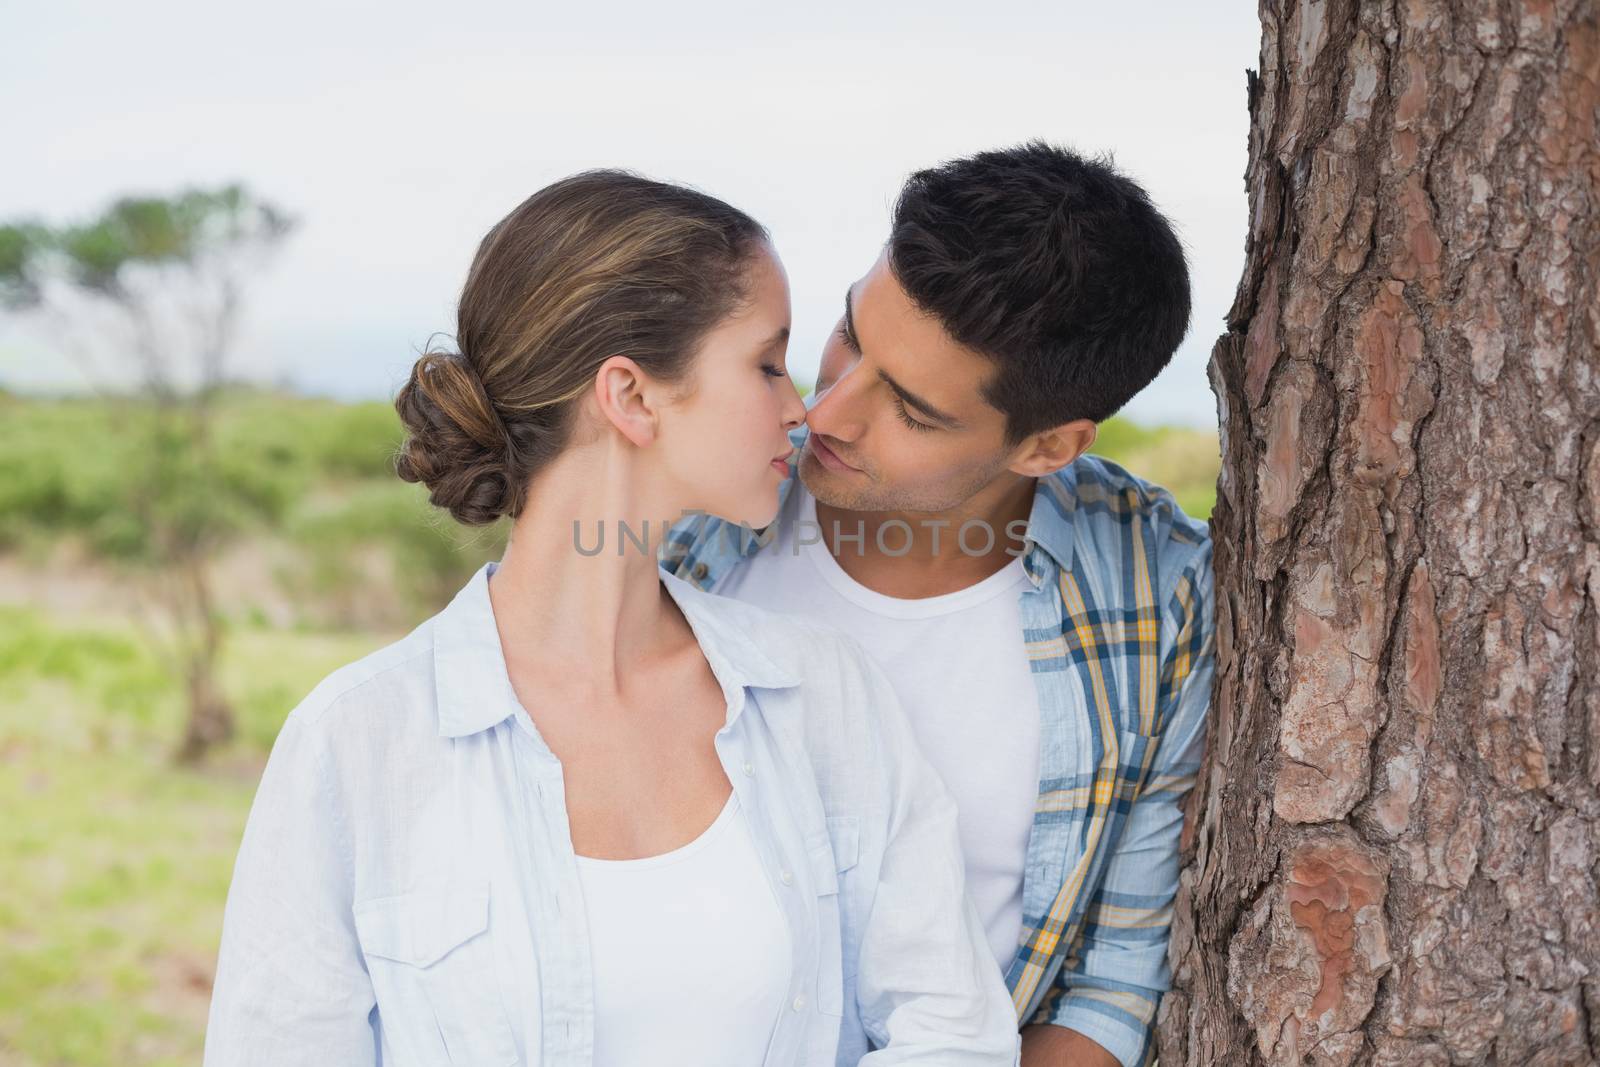 Close up of a romantic young couple about to kiss by tree trunk